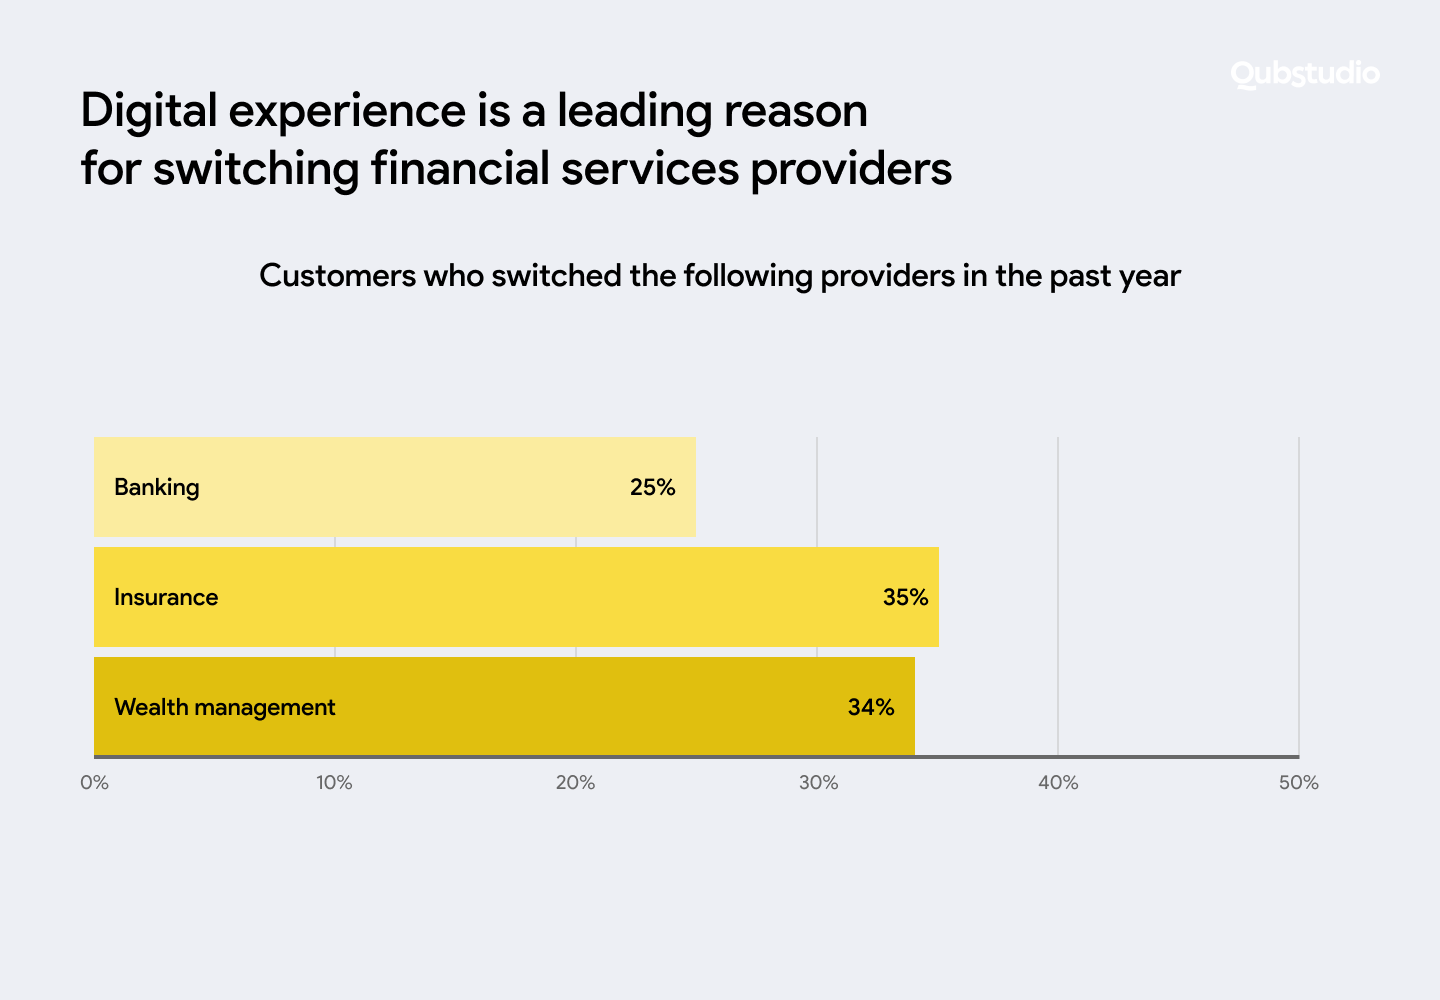 Illustration depicting the digital experience as a reason for switching financial service providers